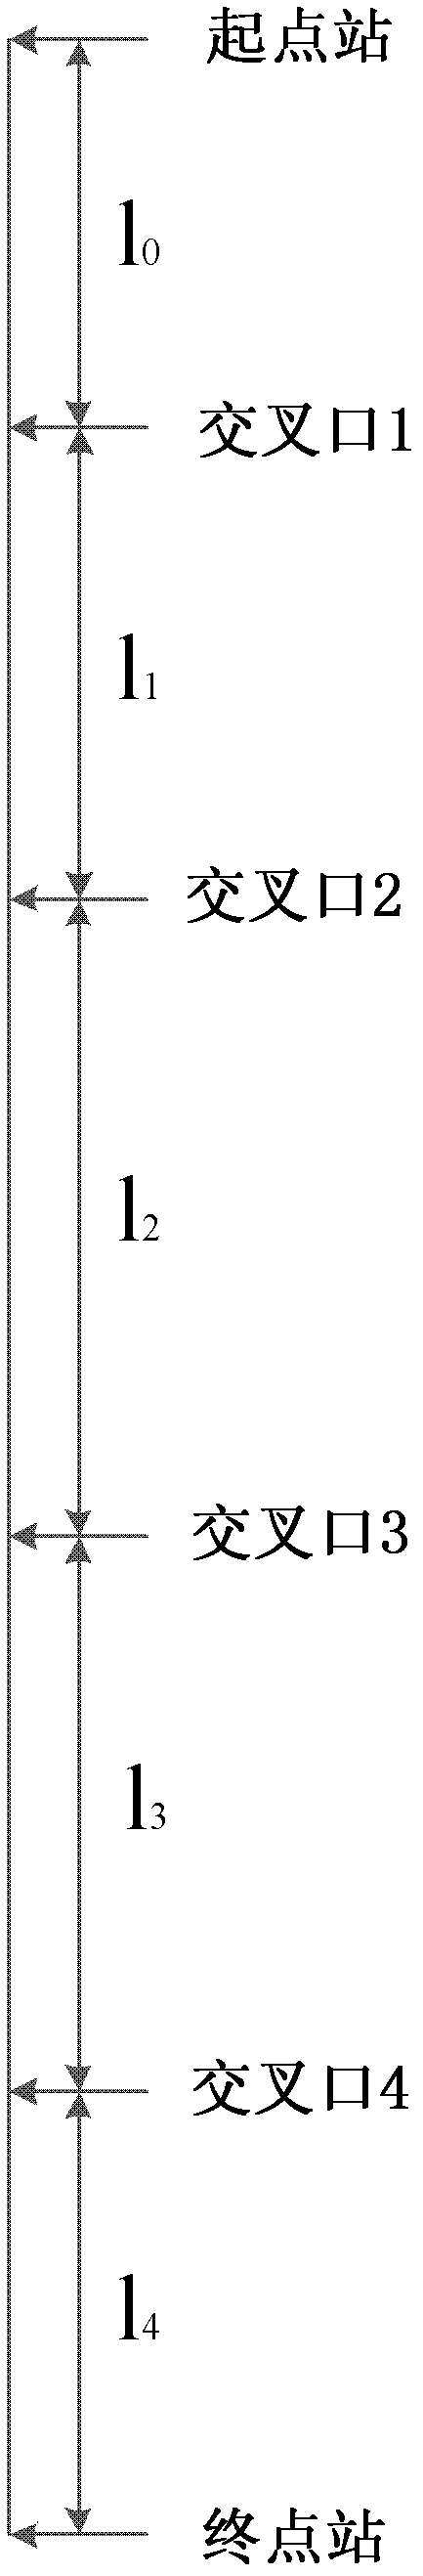 Method for setting bidirectional green wave signals for bus trunk line